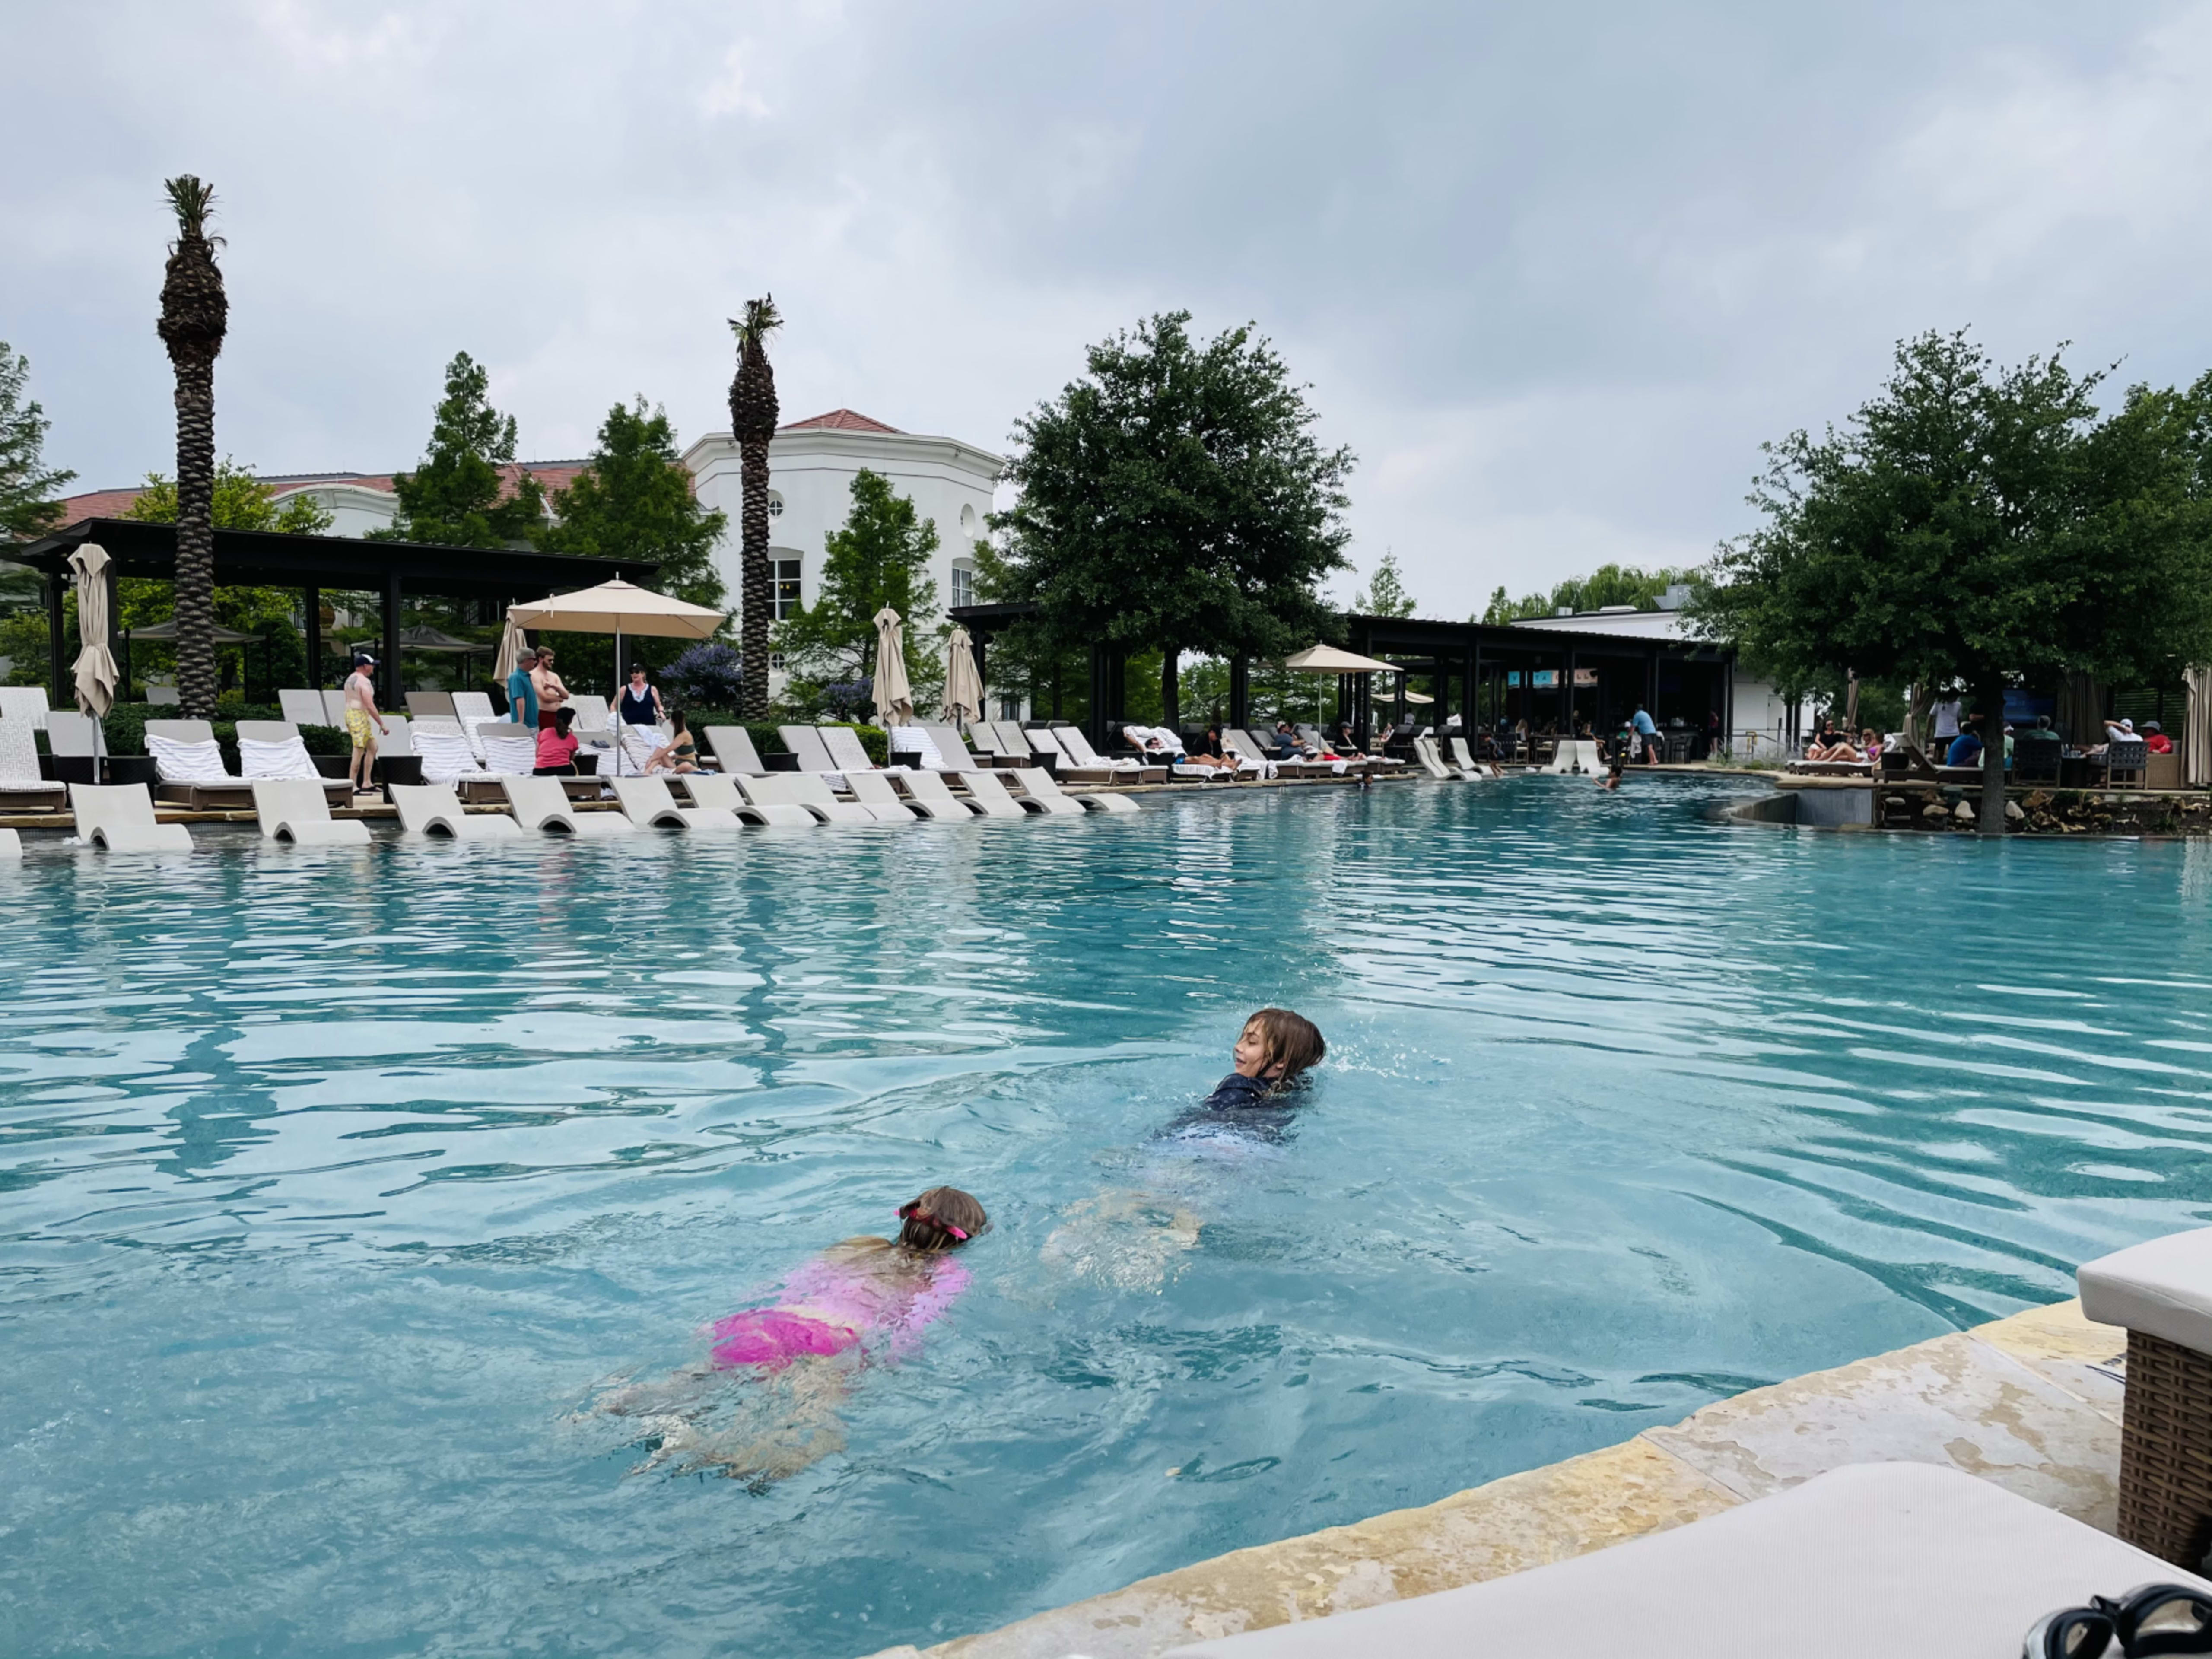 La Cantera Resort & Spa is one of the best places to stay in San Antonio